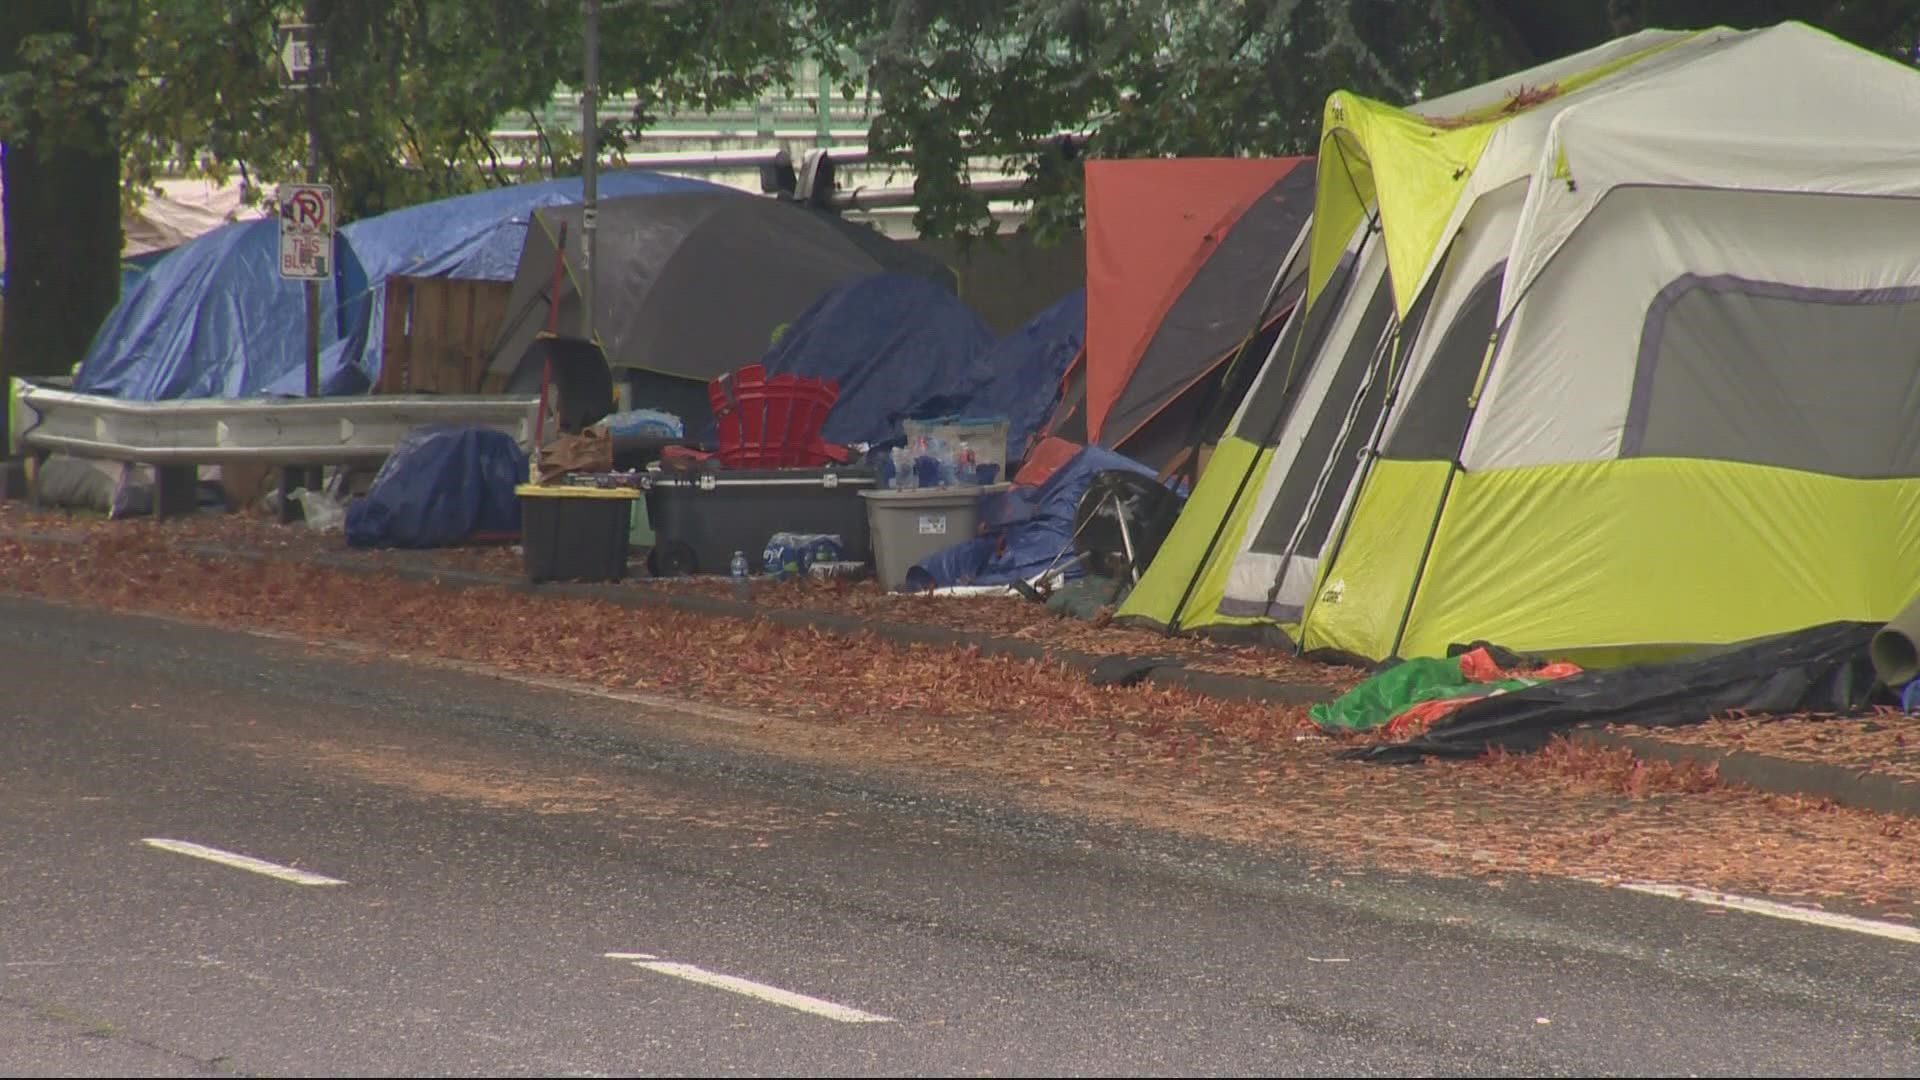 The city has posted the camp for removal multiple times, but the proximity to services means that tents always return.